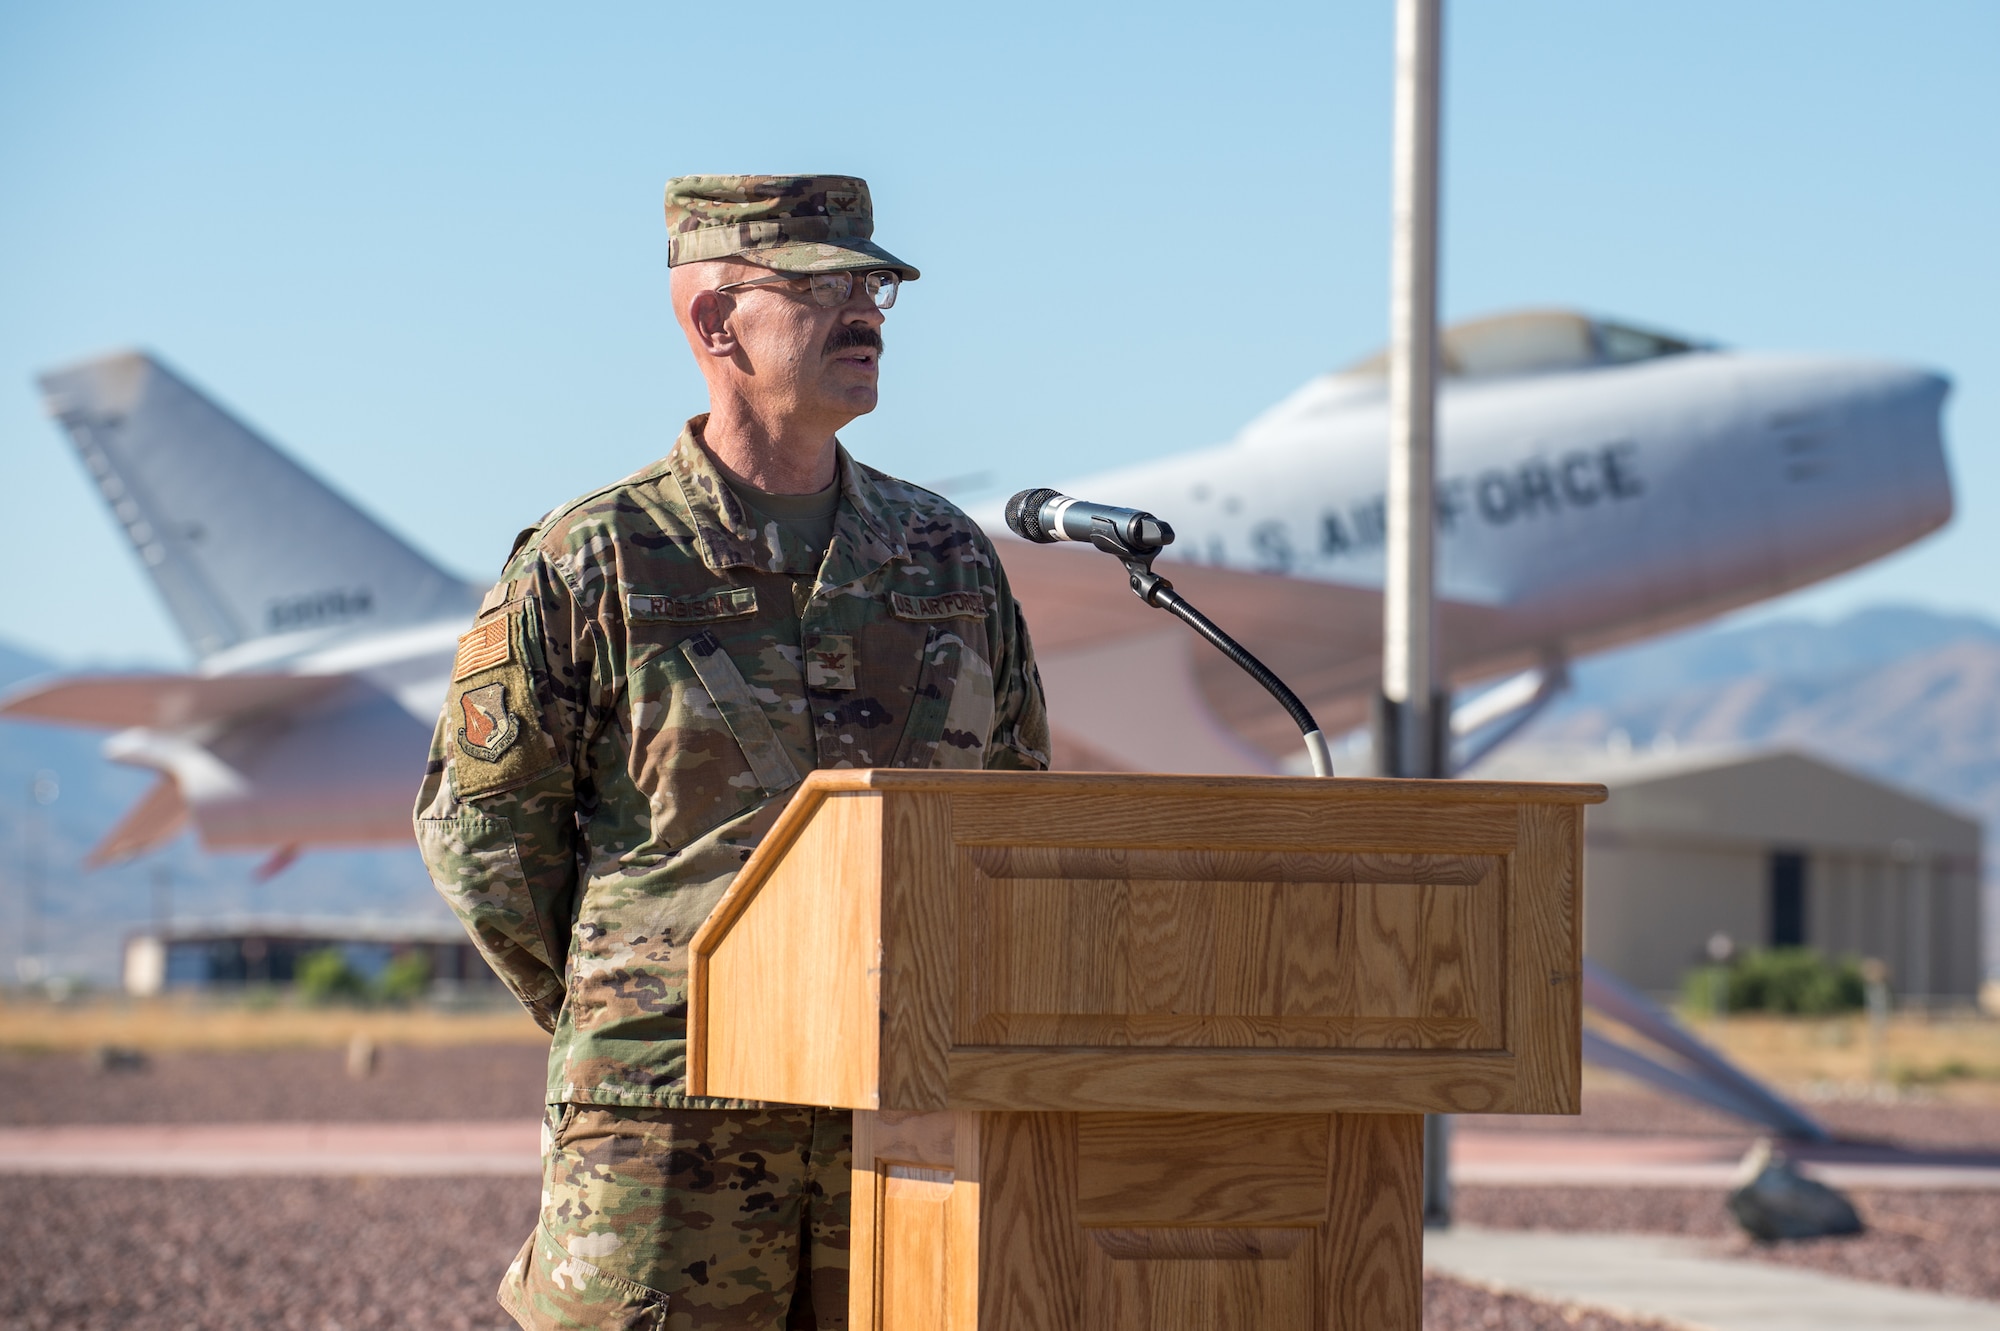 Col. Dwayne Robison, the outgoing Operating Location Air Force Plant 42 Director, provides his remarks during a Change of Leadership Ceremony between Robison and Dr. David Smith at Plant 42, in Palmdale, California, July 1. (Air Force photo by Ethan Wagner)